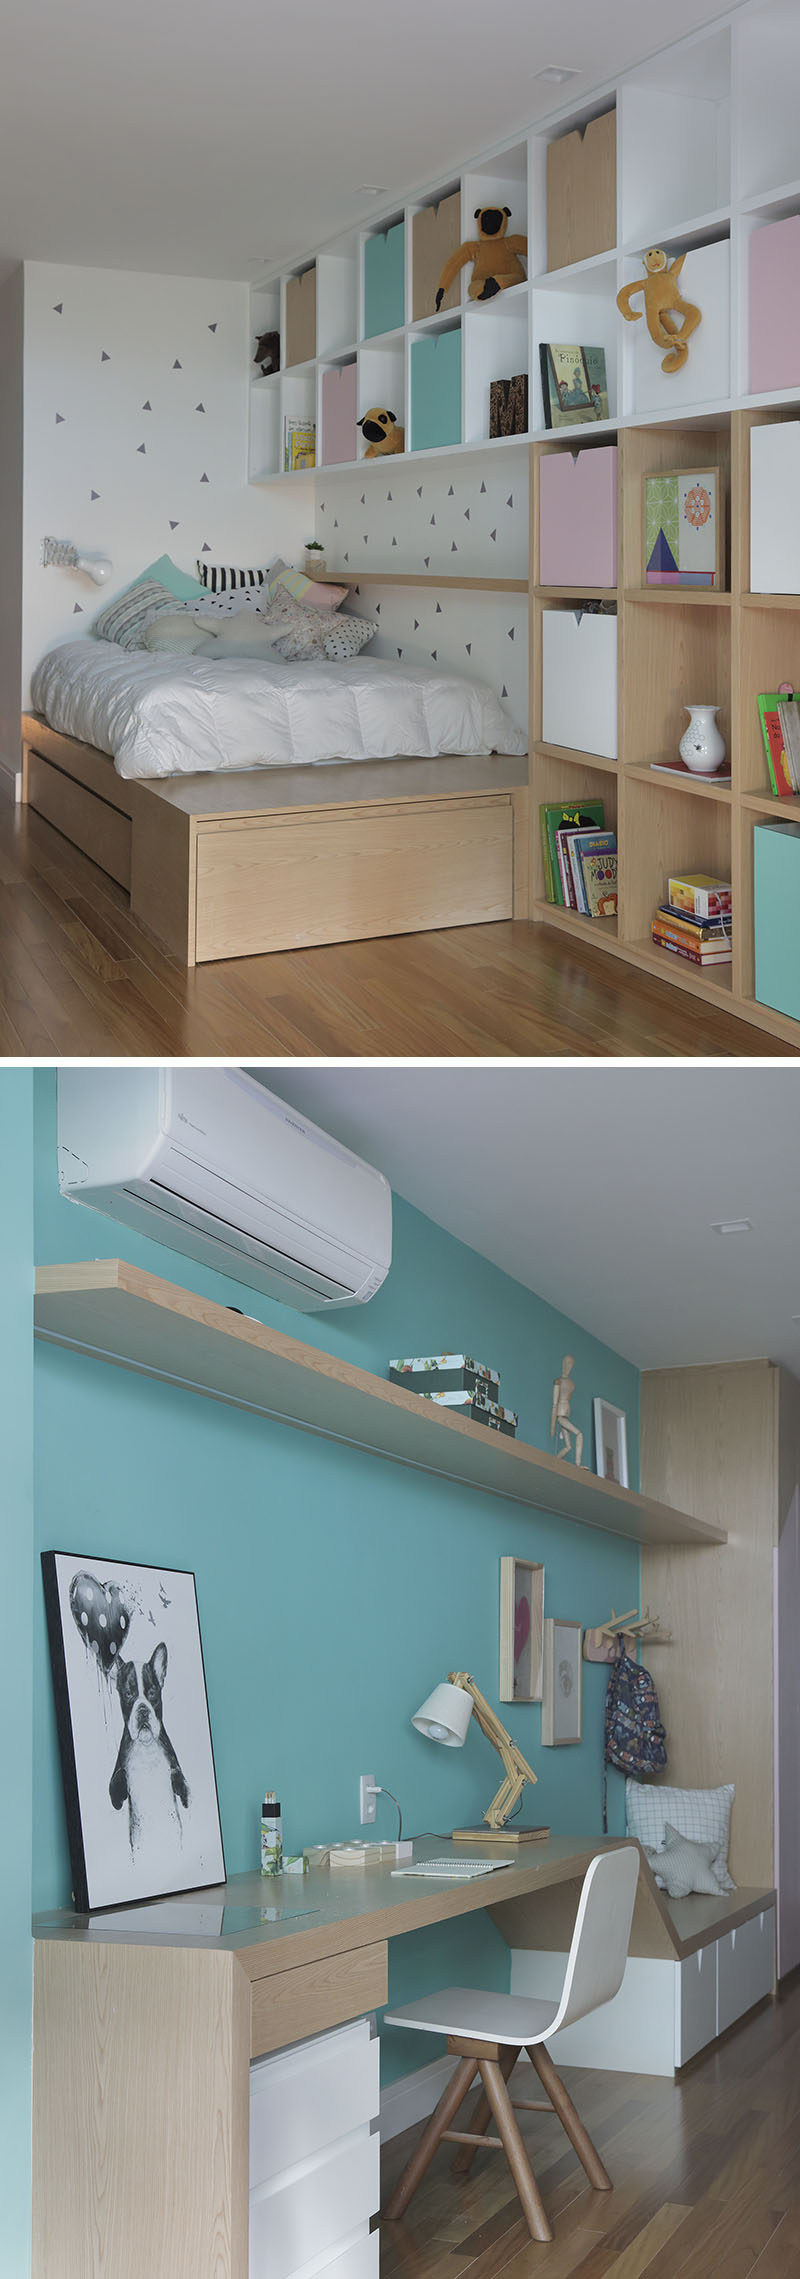 In this modern children's bedroom, a wood bed frame has been custom designed and it morphs into a wood and white bookshelf with colorful storage boxes. On the opposite wall, a teal blue wall becomes the background for a built-in bench and desk. #KidsBedroom #ChildrensBedroom #ModernKidsRoom #ModernBedroom